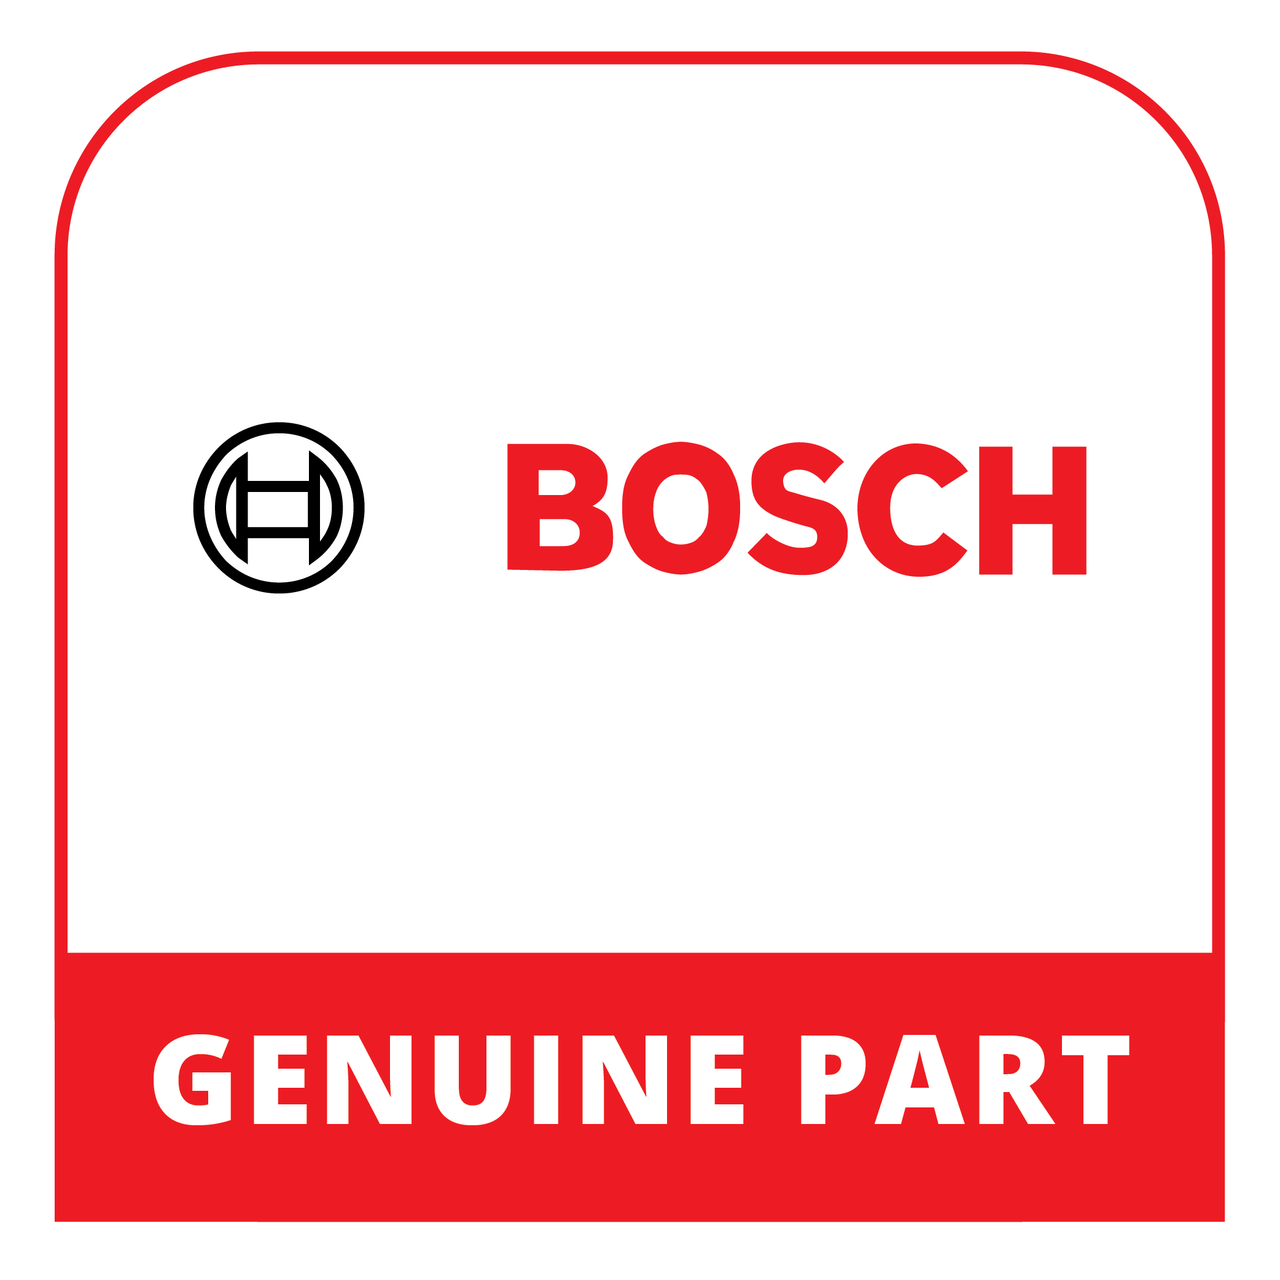 Bosch (Thermador) 12030371 - Power Module Programmed - Genuine Bosch (Thermador) Part